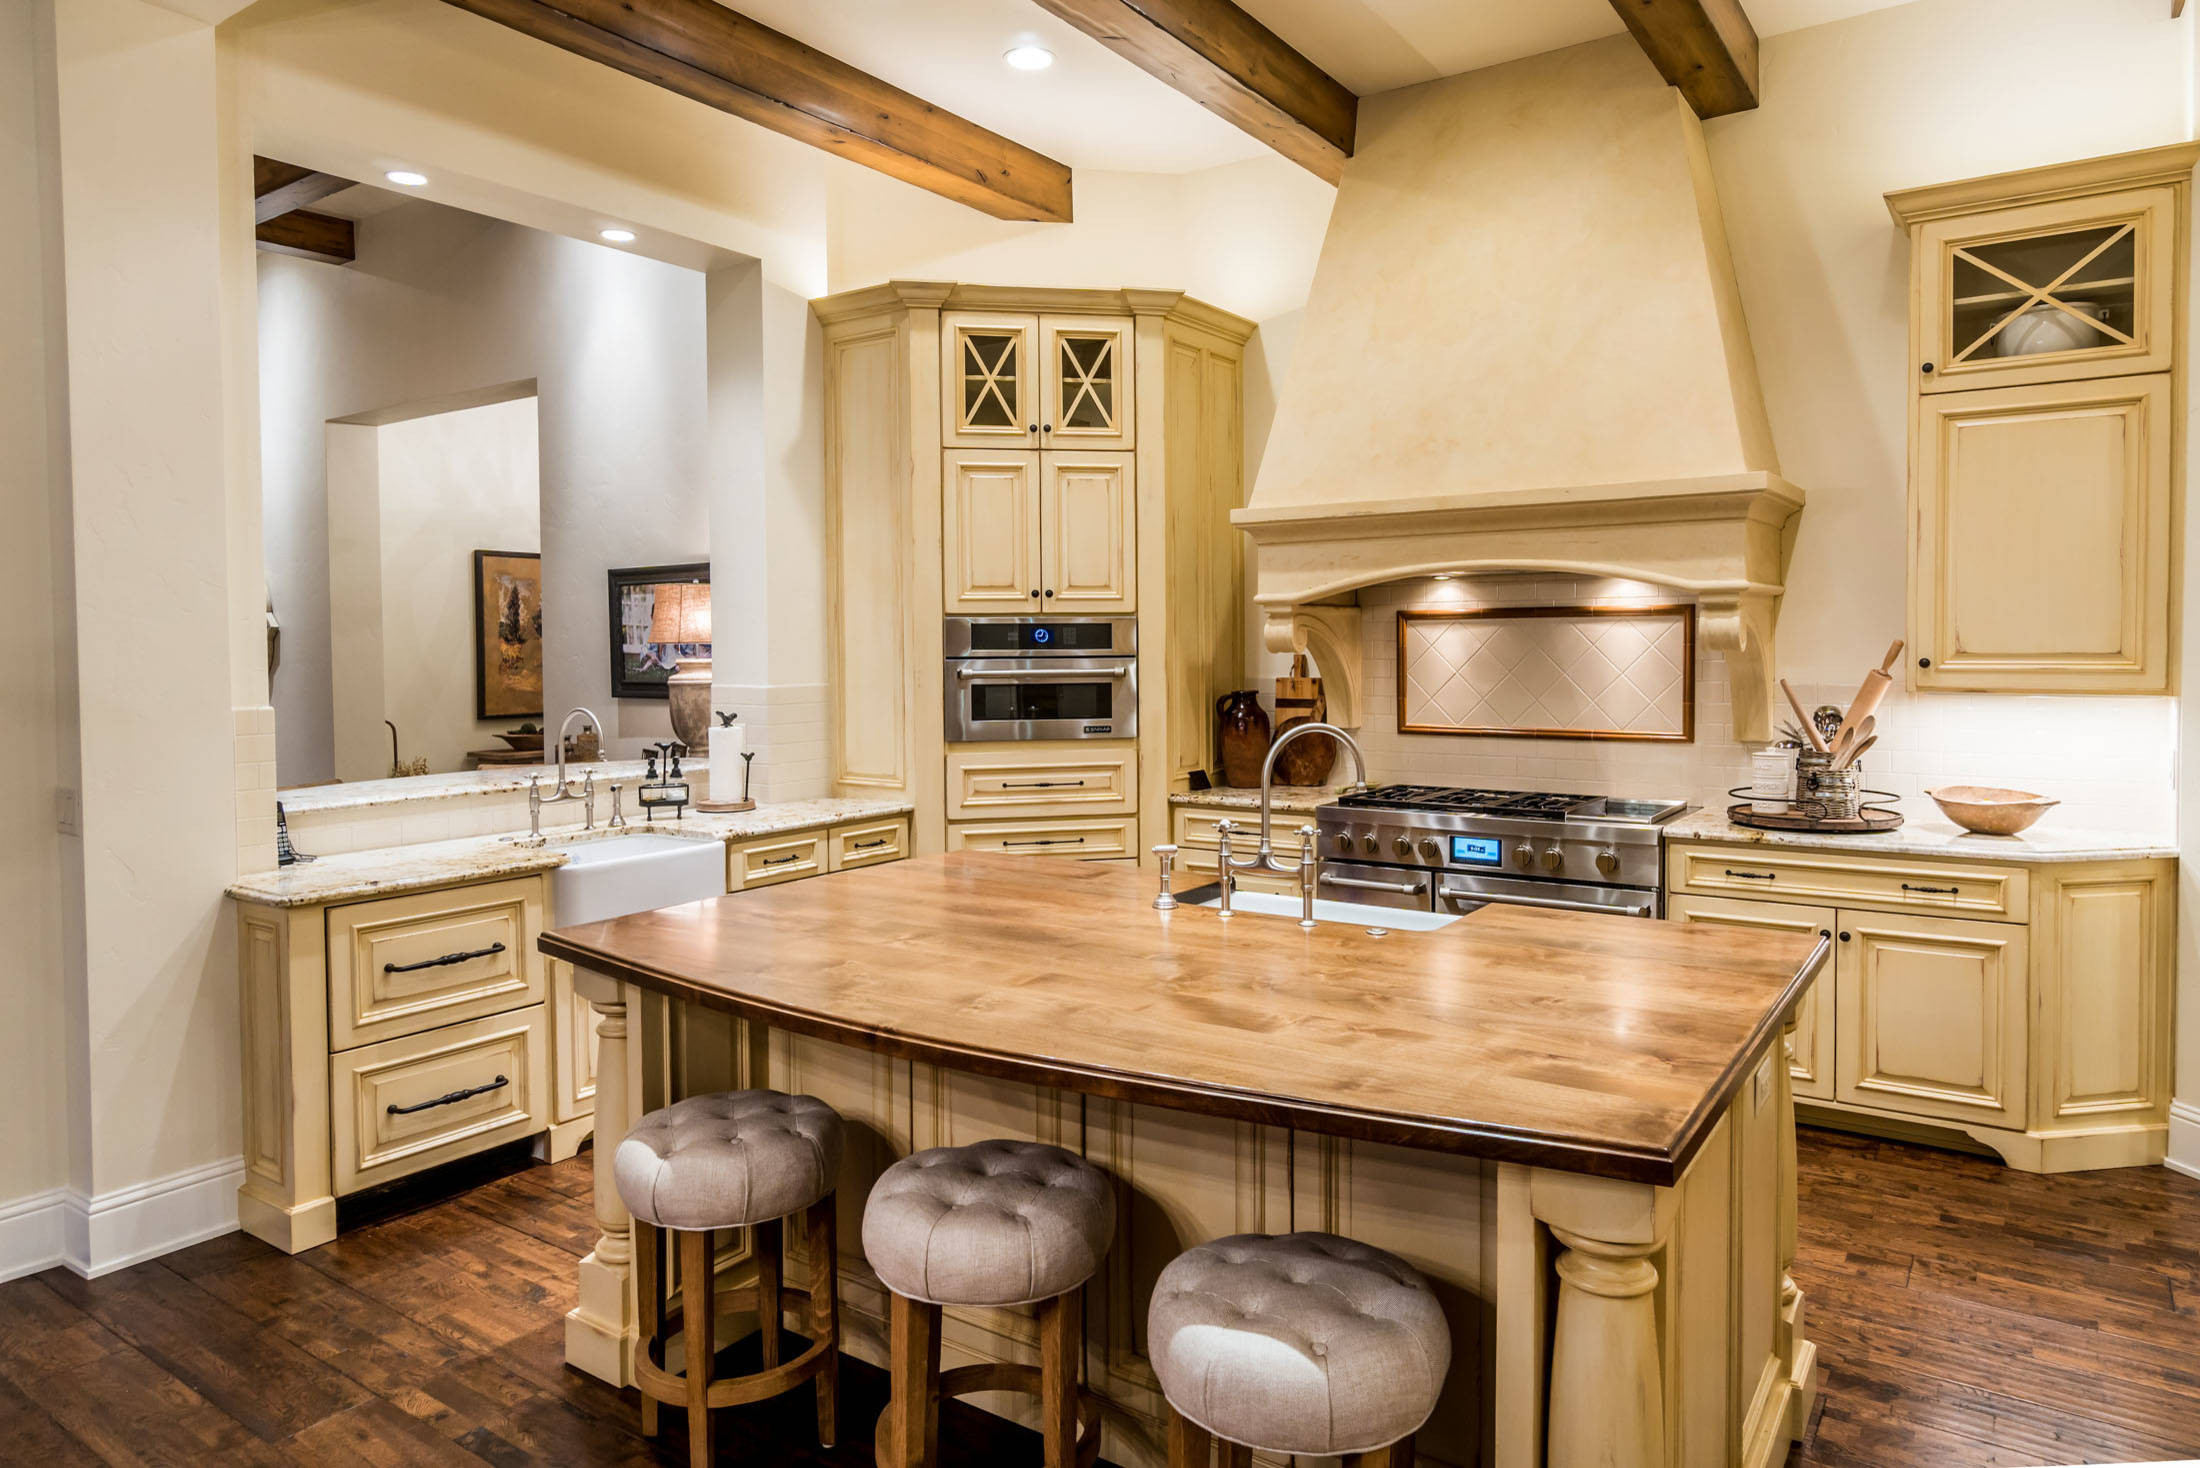 Rustic Kitchen Themes
 15 Inspirational Rustic Kitchen Designs You Will Adore